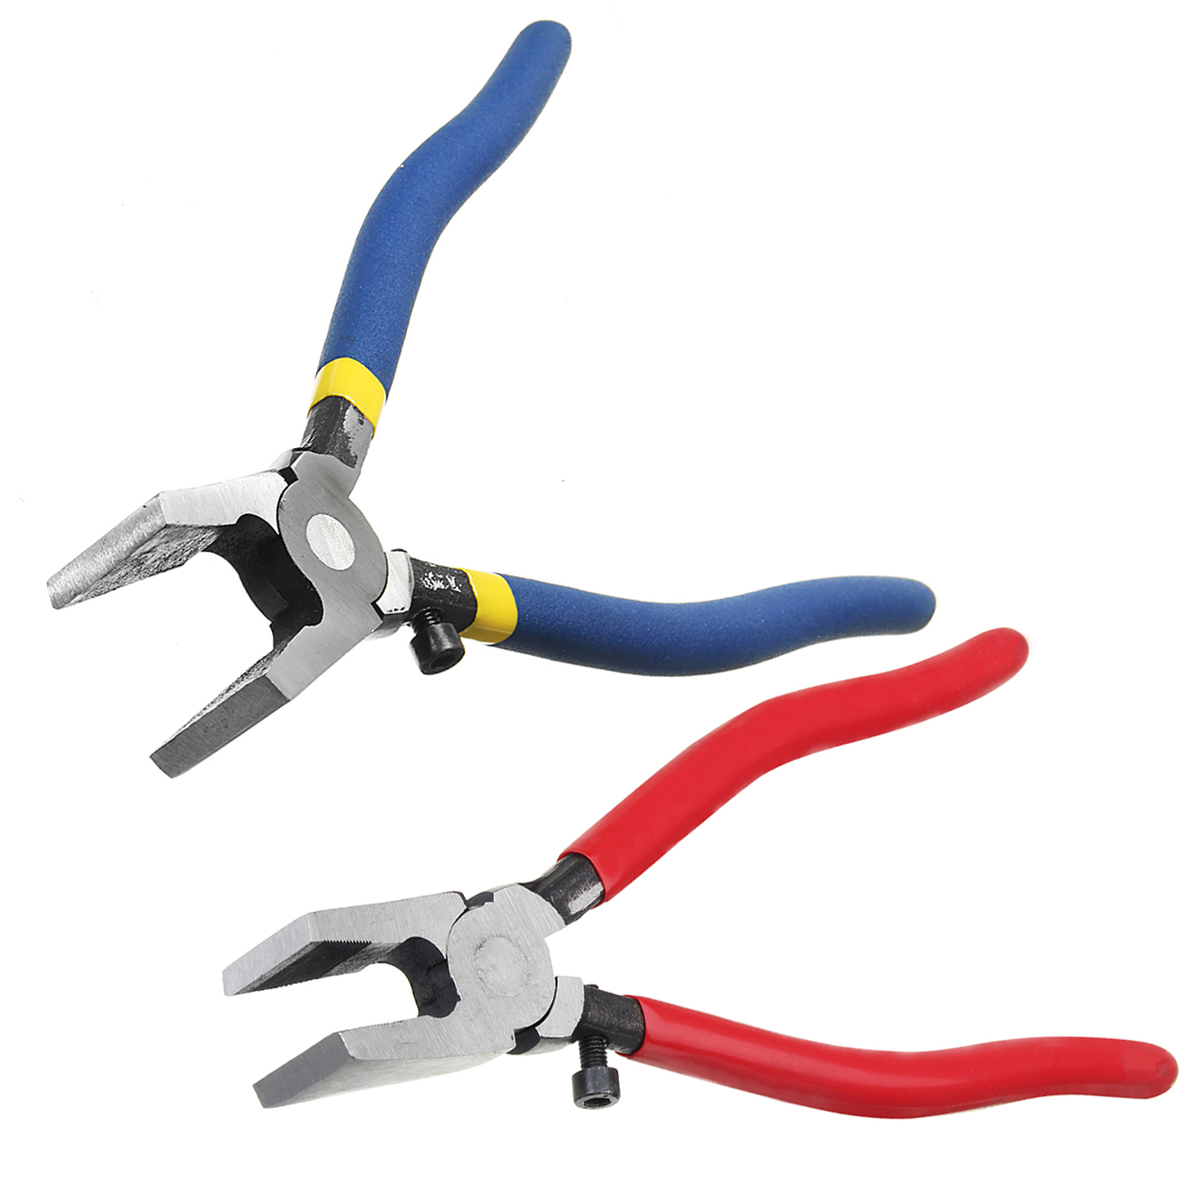 Stained-Glass-Tool-Kit-Running-Pliers-Breaking-Grozing-Pliers-Grip-Cutter-Non-slip-Handle-1334030-2